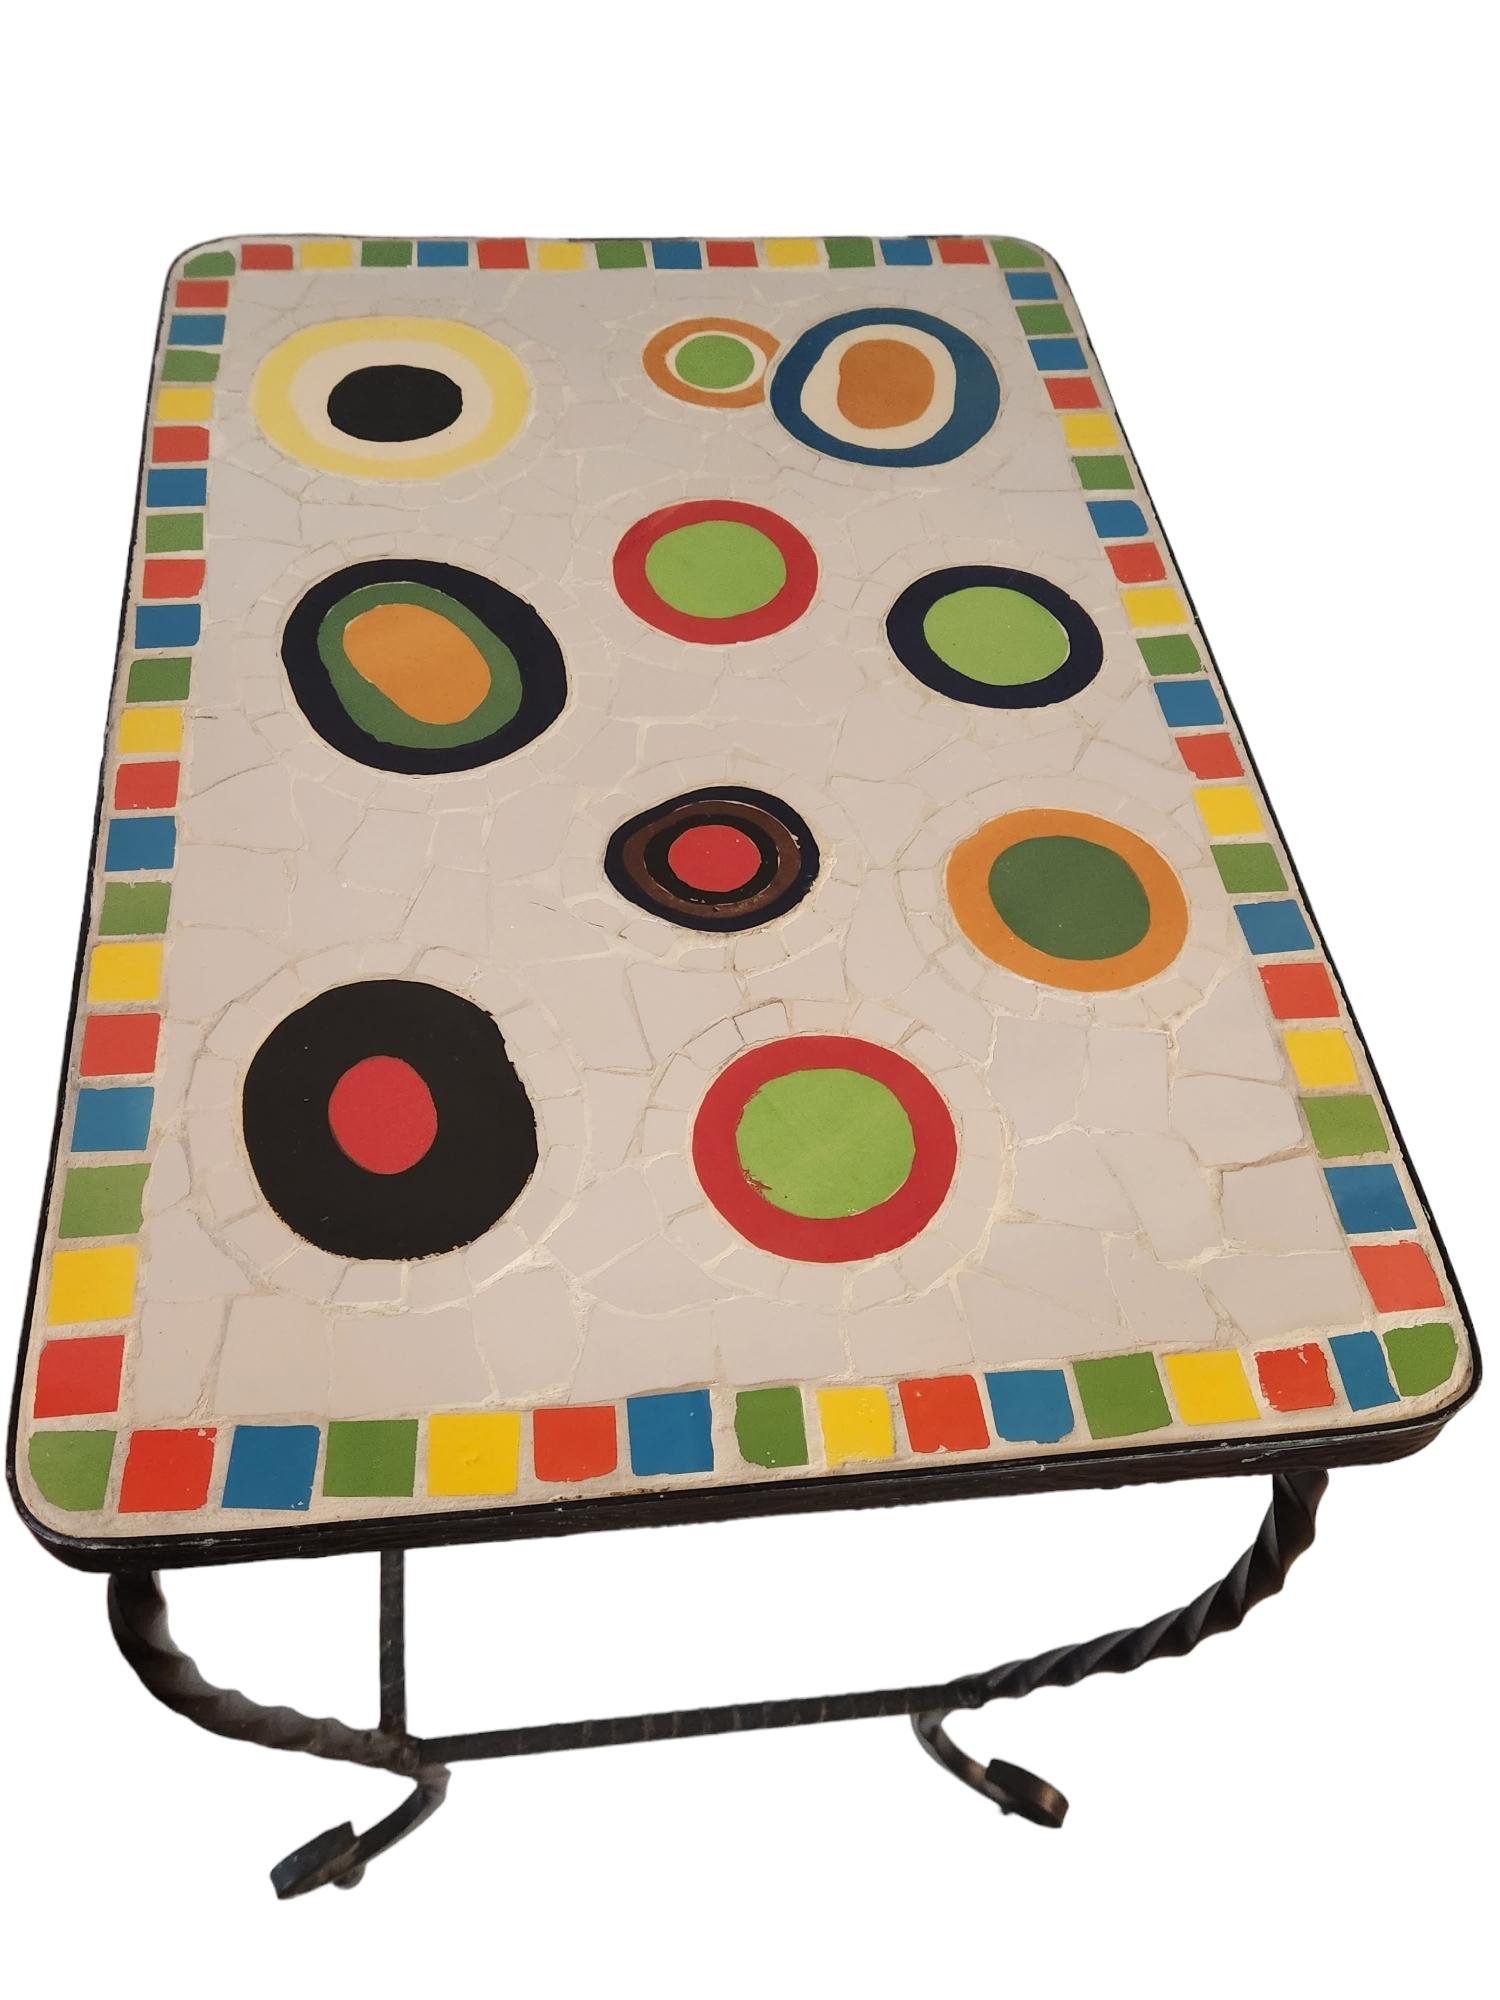 Two outdoor garden tables the frames are constructed of twisted wrought iron.
The tops are bordered in squares of colored tiles with colorful circles of ceramic surrounded in assorted shapes of white tile.
The tables are in good condition.
Tables